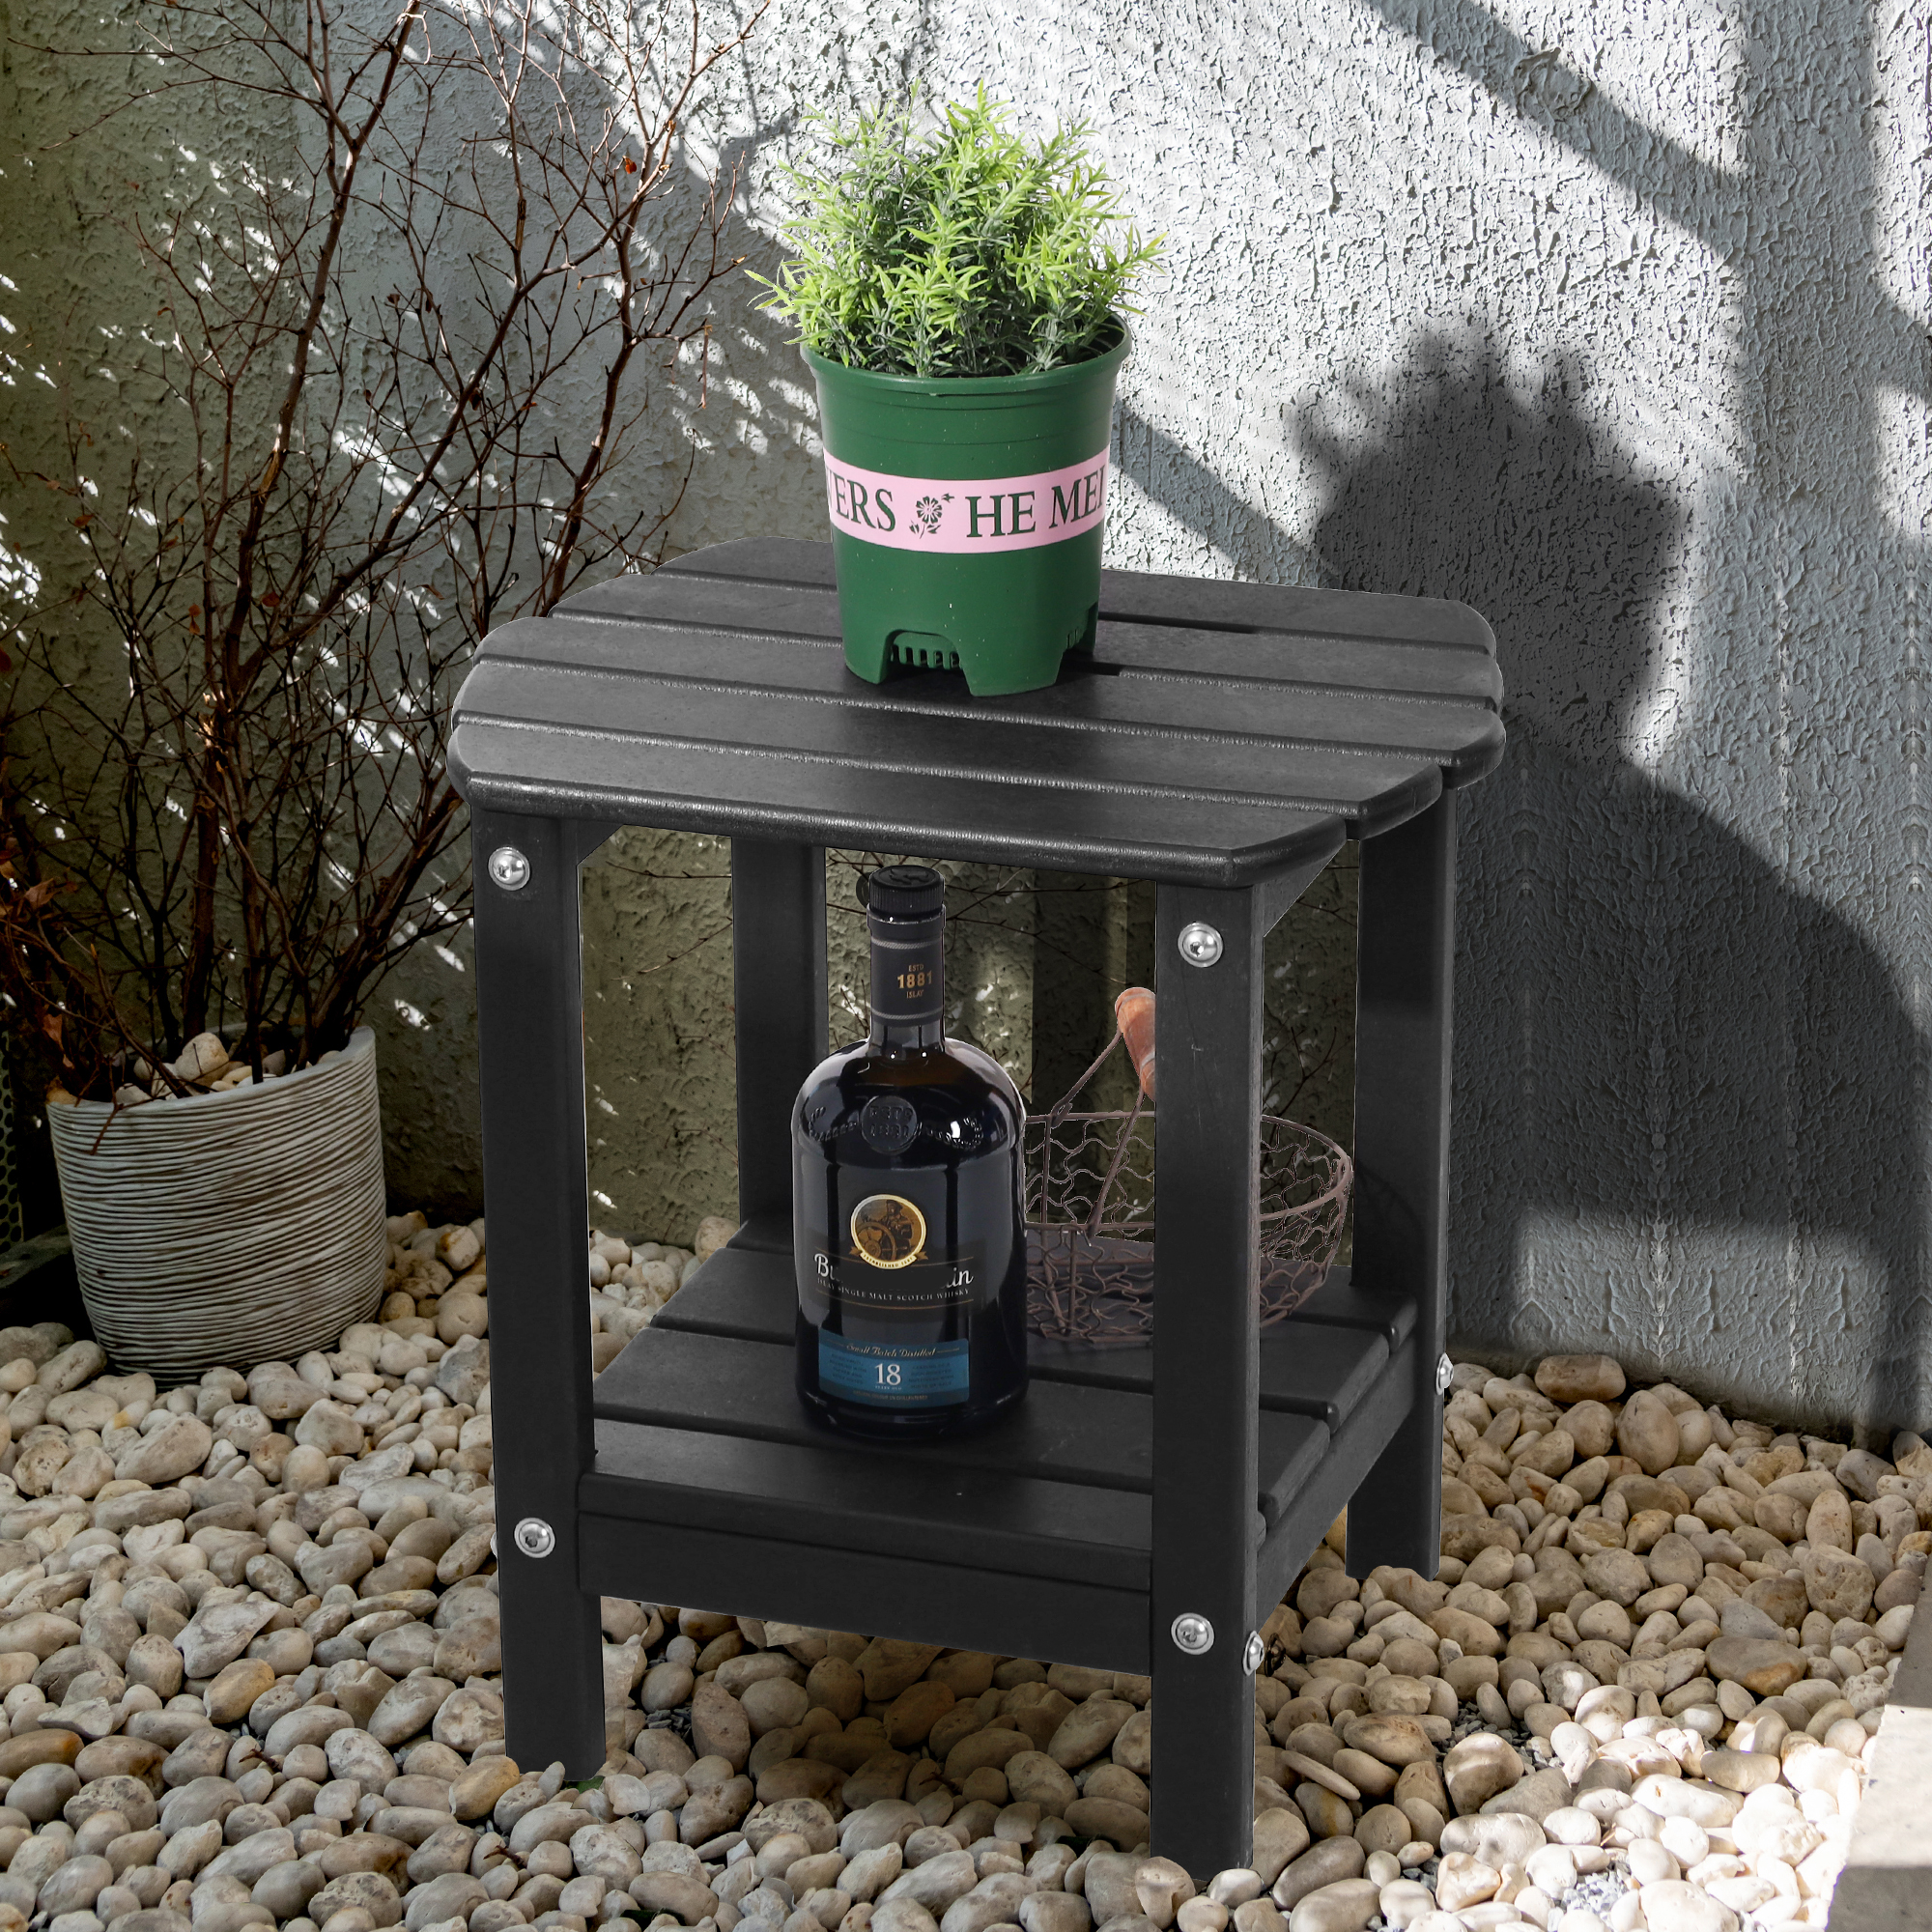 Scafild | Adirondack Side Table Plastic Outdoor End Tables with 2 Layer Storage, Coffee Table for Your Adirondack Chair, Patio Deck Garden, Backyard & Lawn Furniture - Black - image 1 of 8